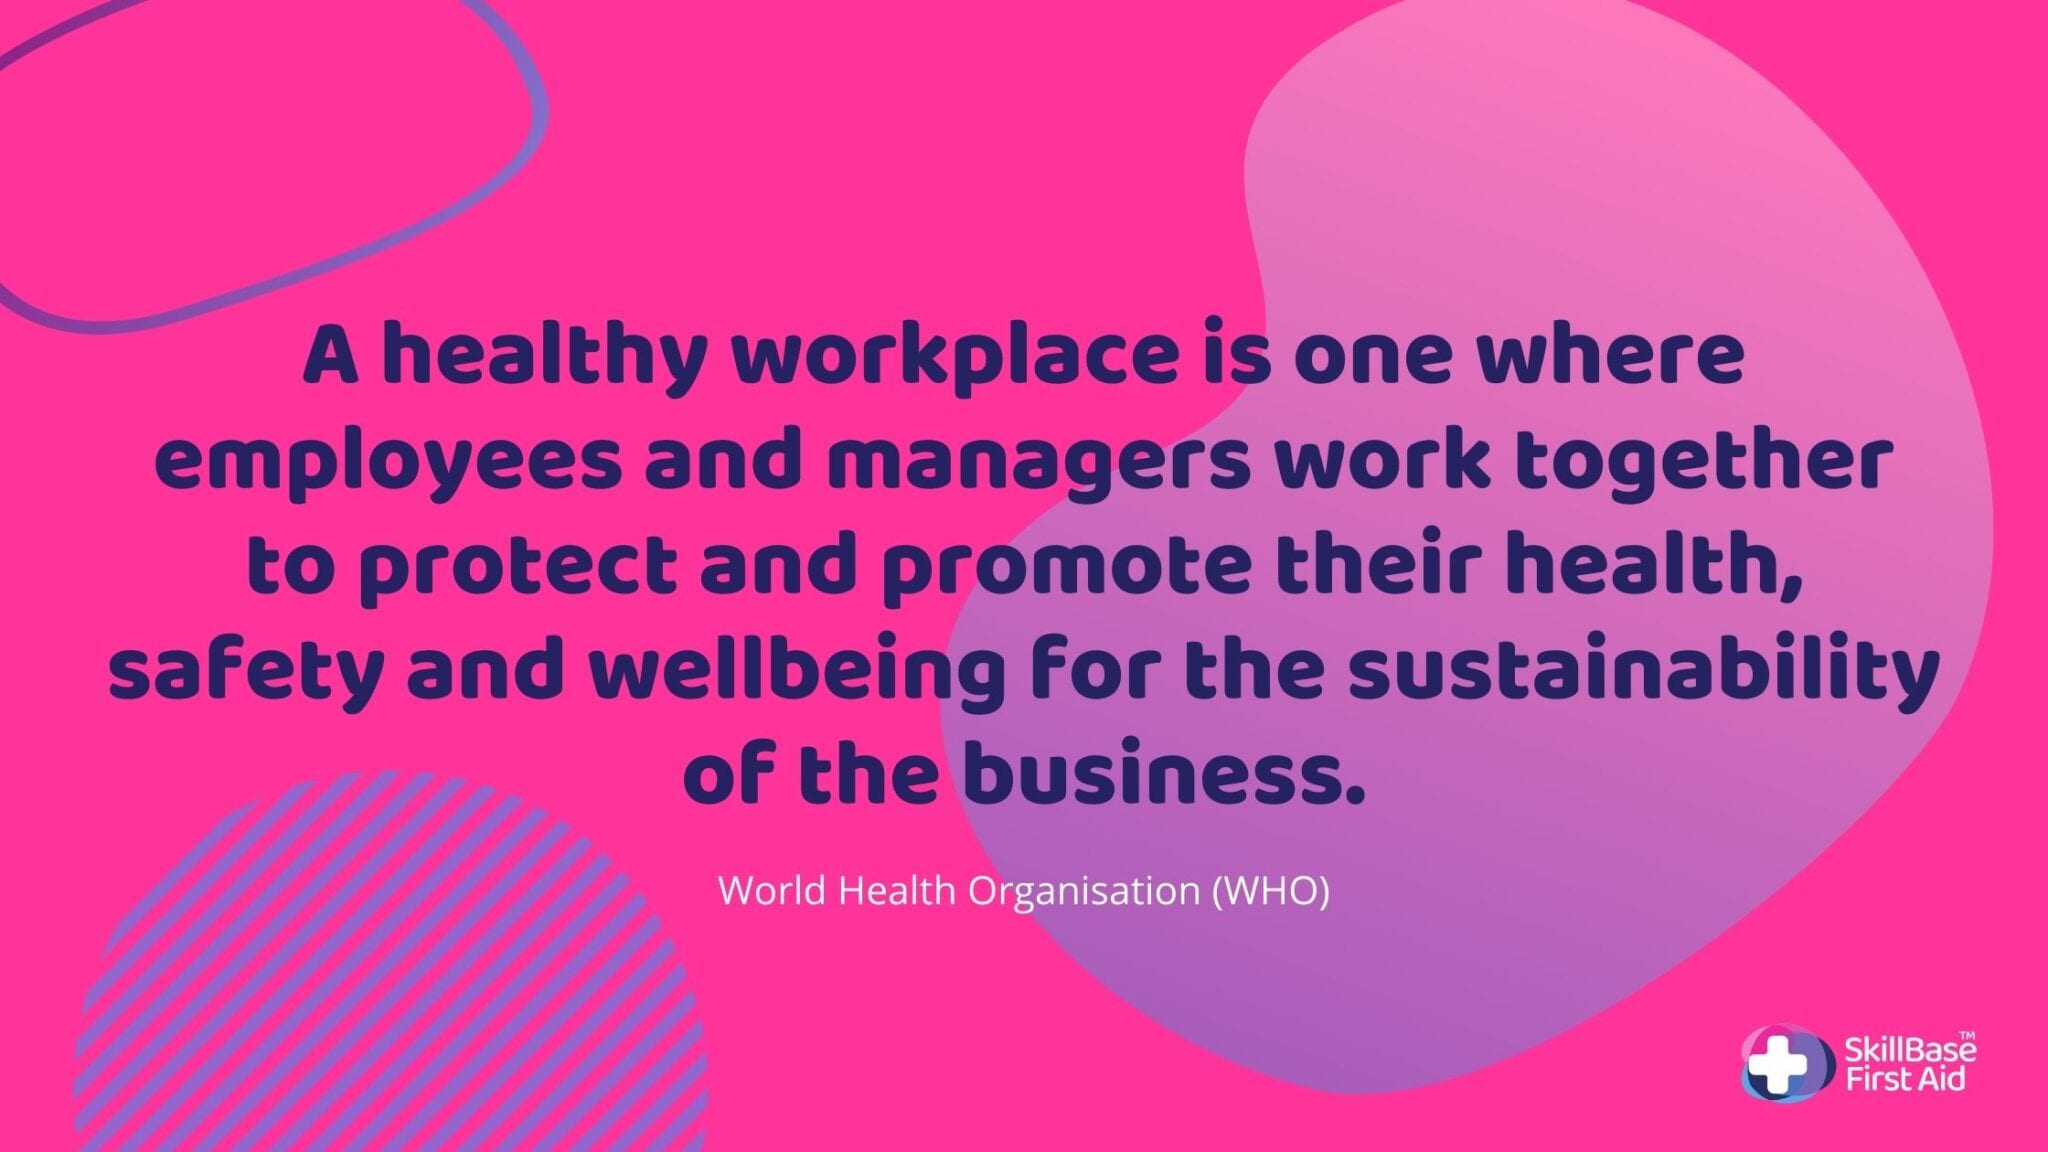 World Health Organisation guidelines on a healthy workplace banner